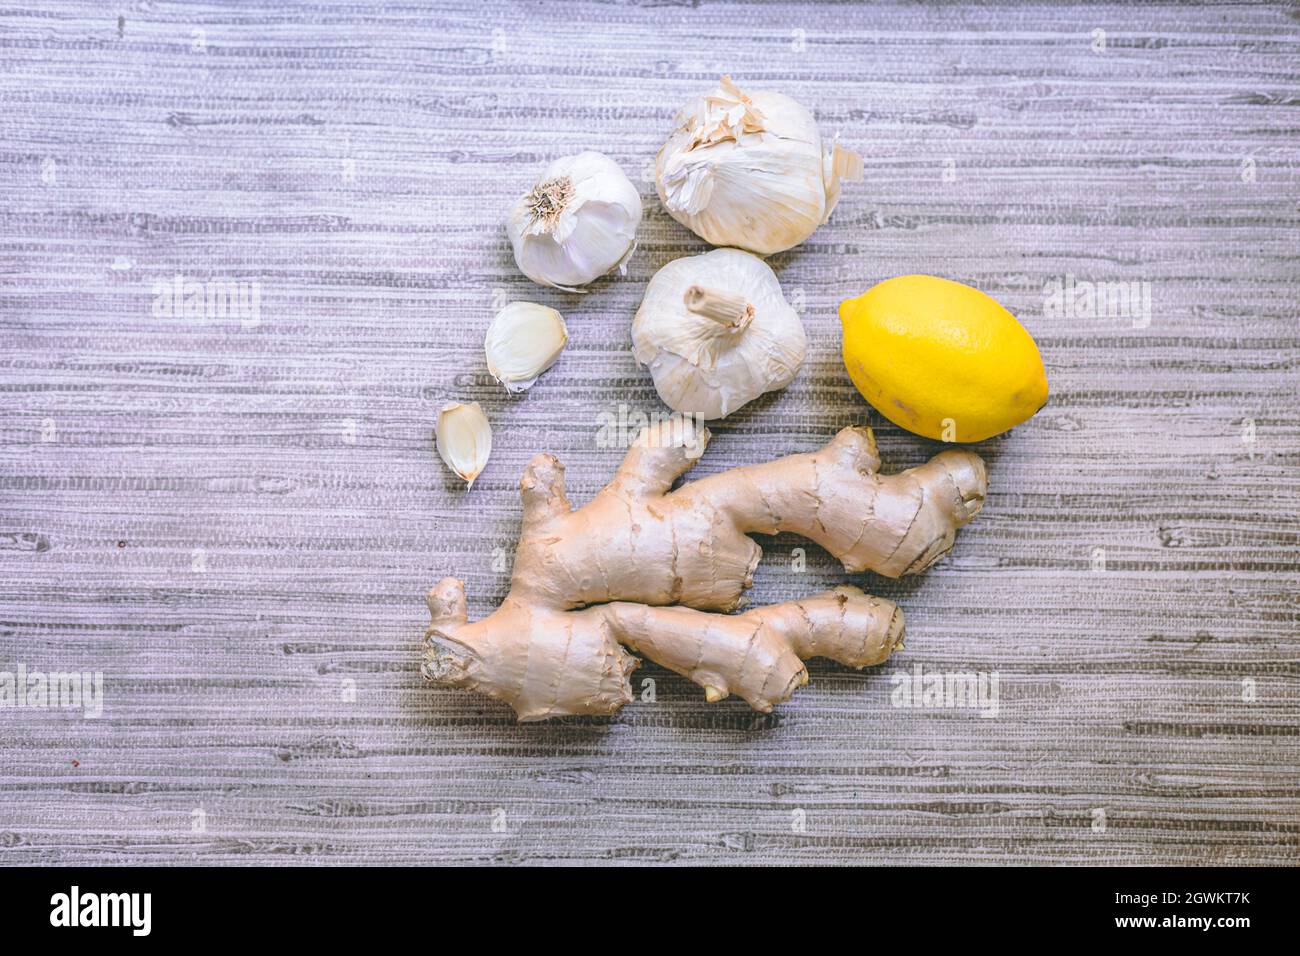 Top view of ginger, lemon and garlic. Immune system boosters Stock Photo